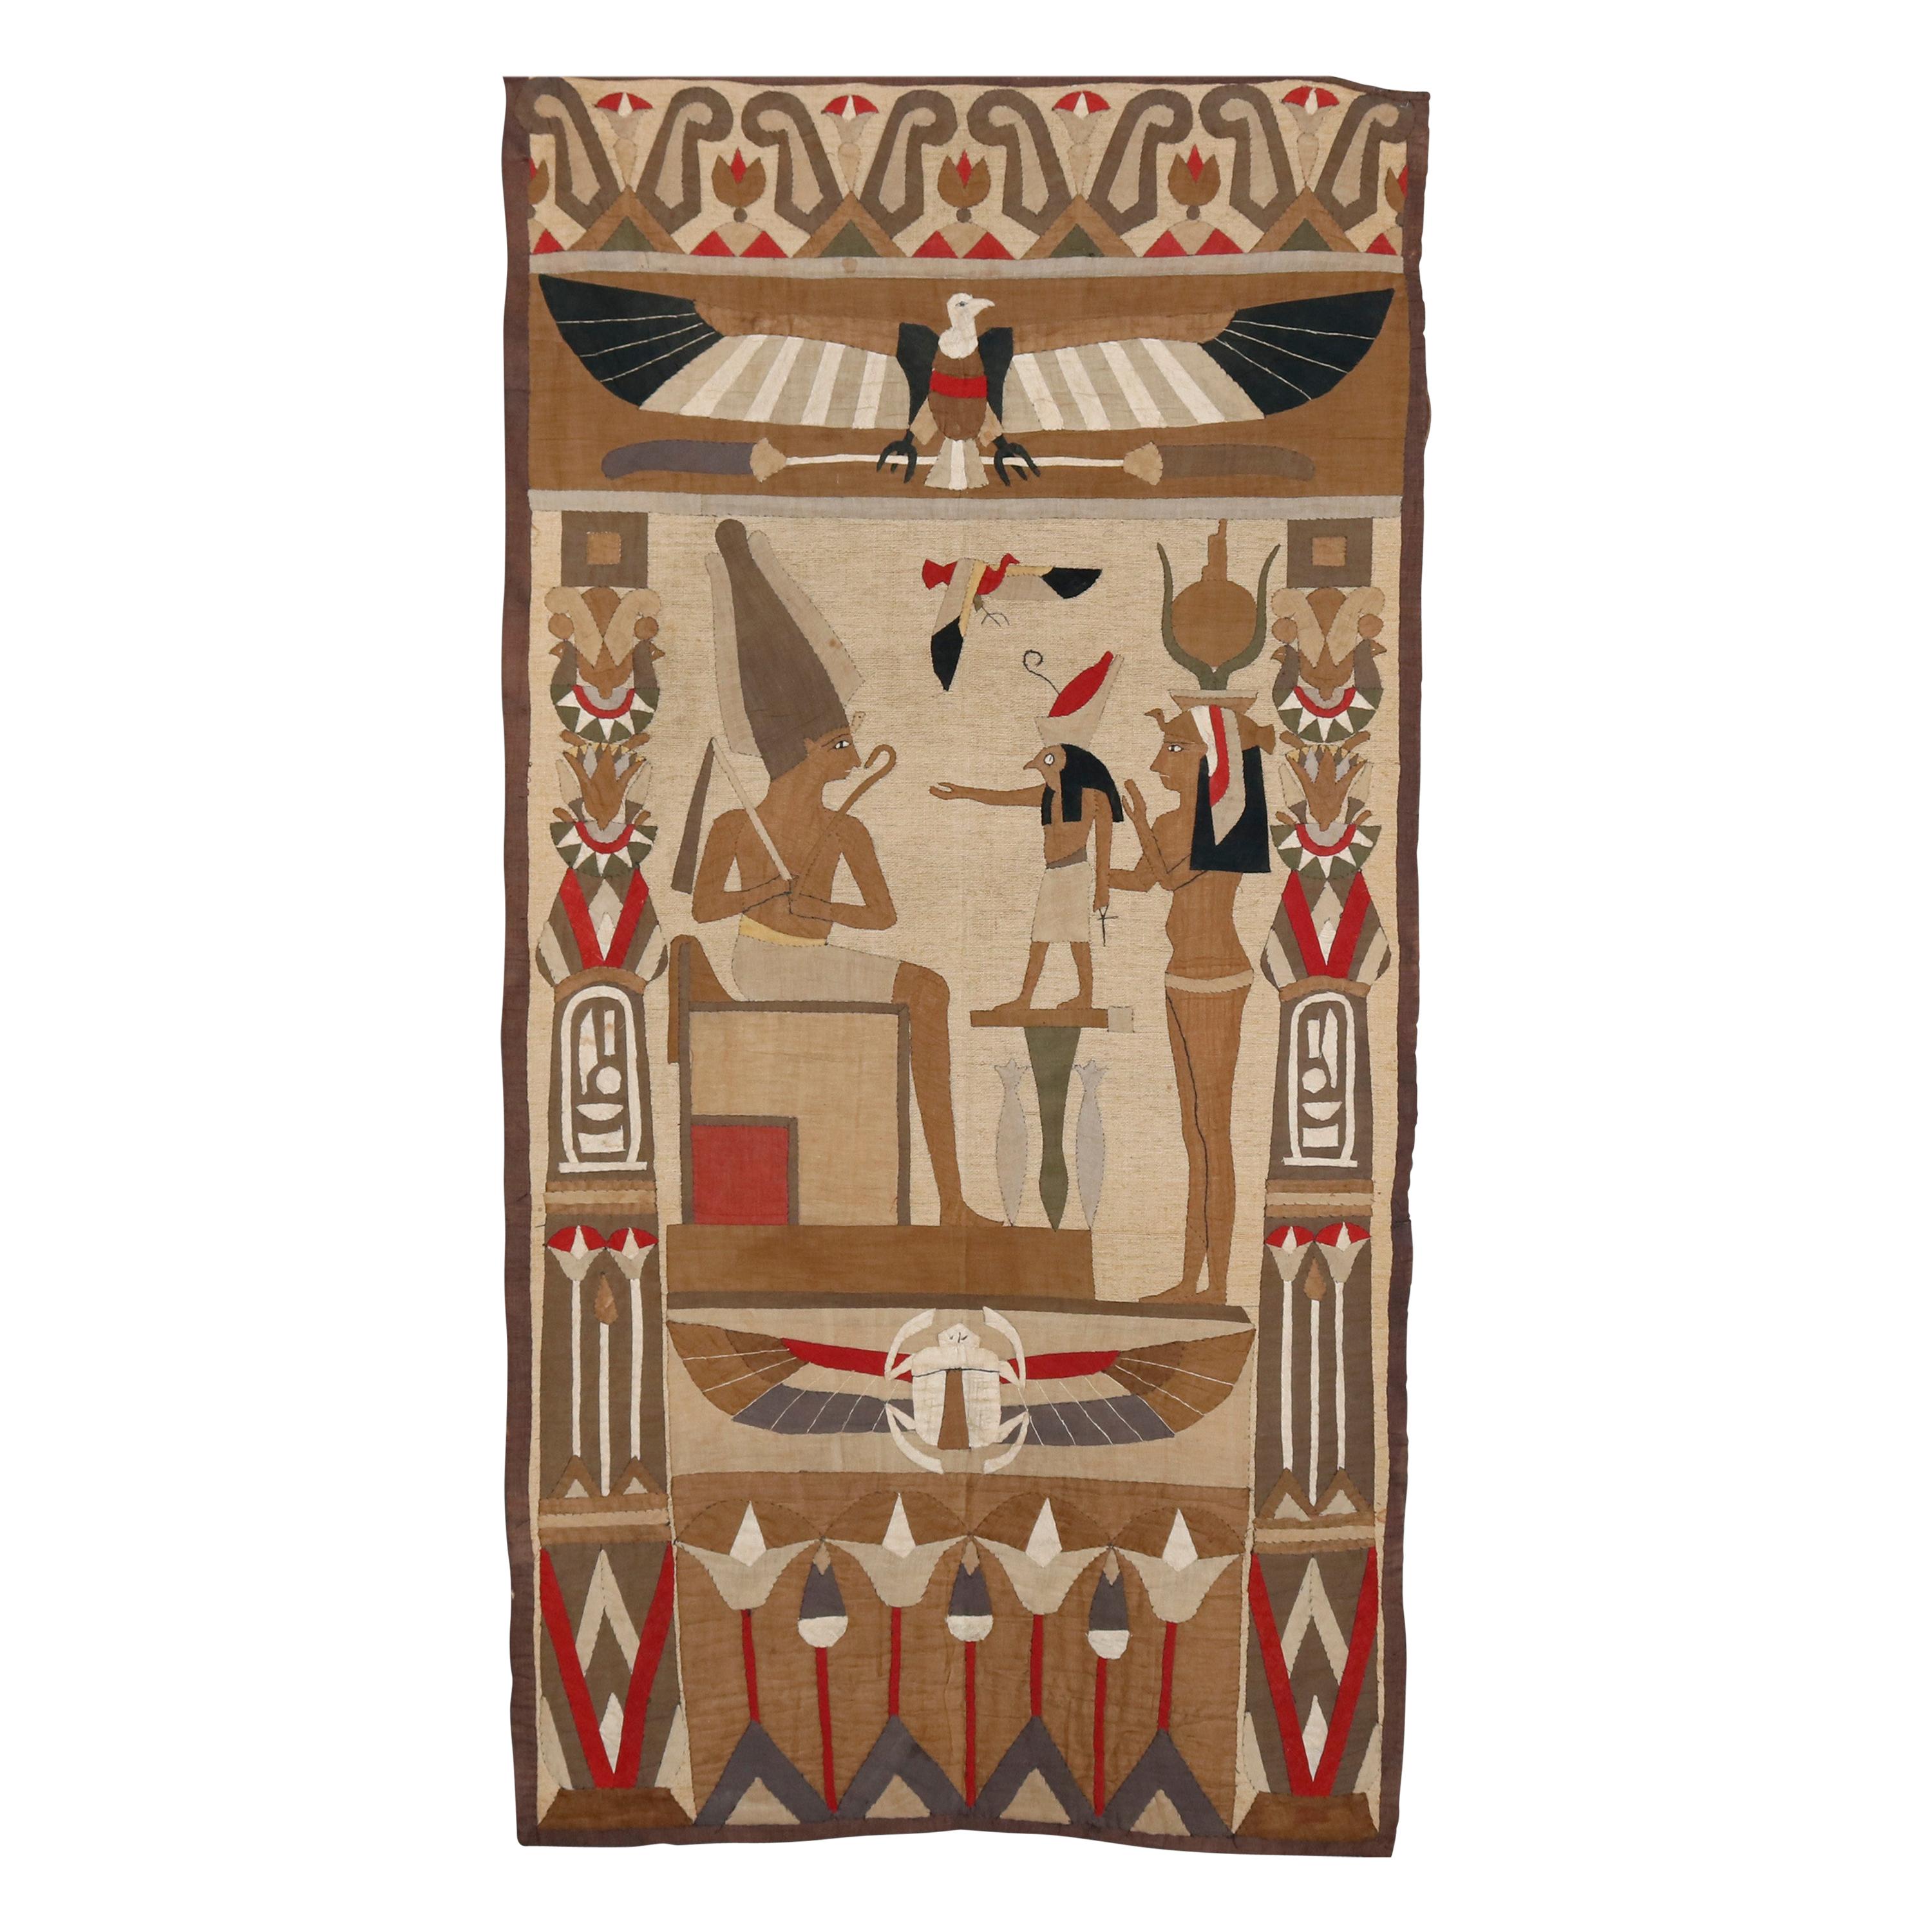 Antique Egyptian Revival Wall Tapestry with Figures & Eagle, circa 1920